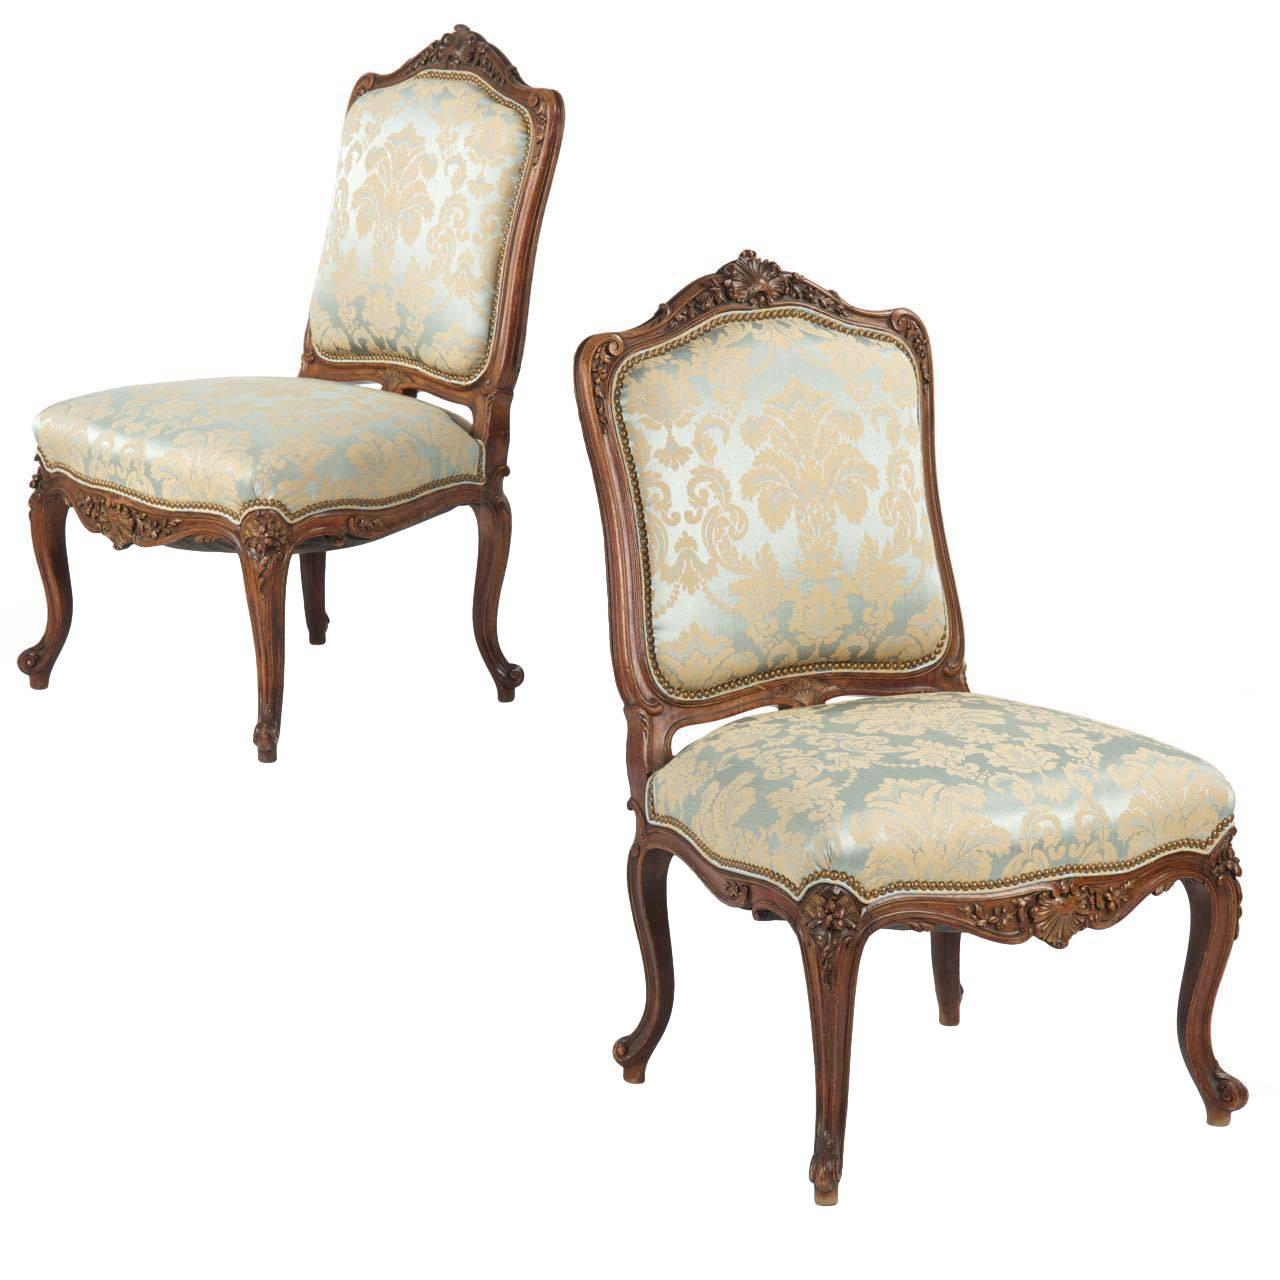 Rococo Revival Pair of Carved Walnut Antique Side Chairs, 19th Century